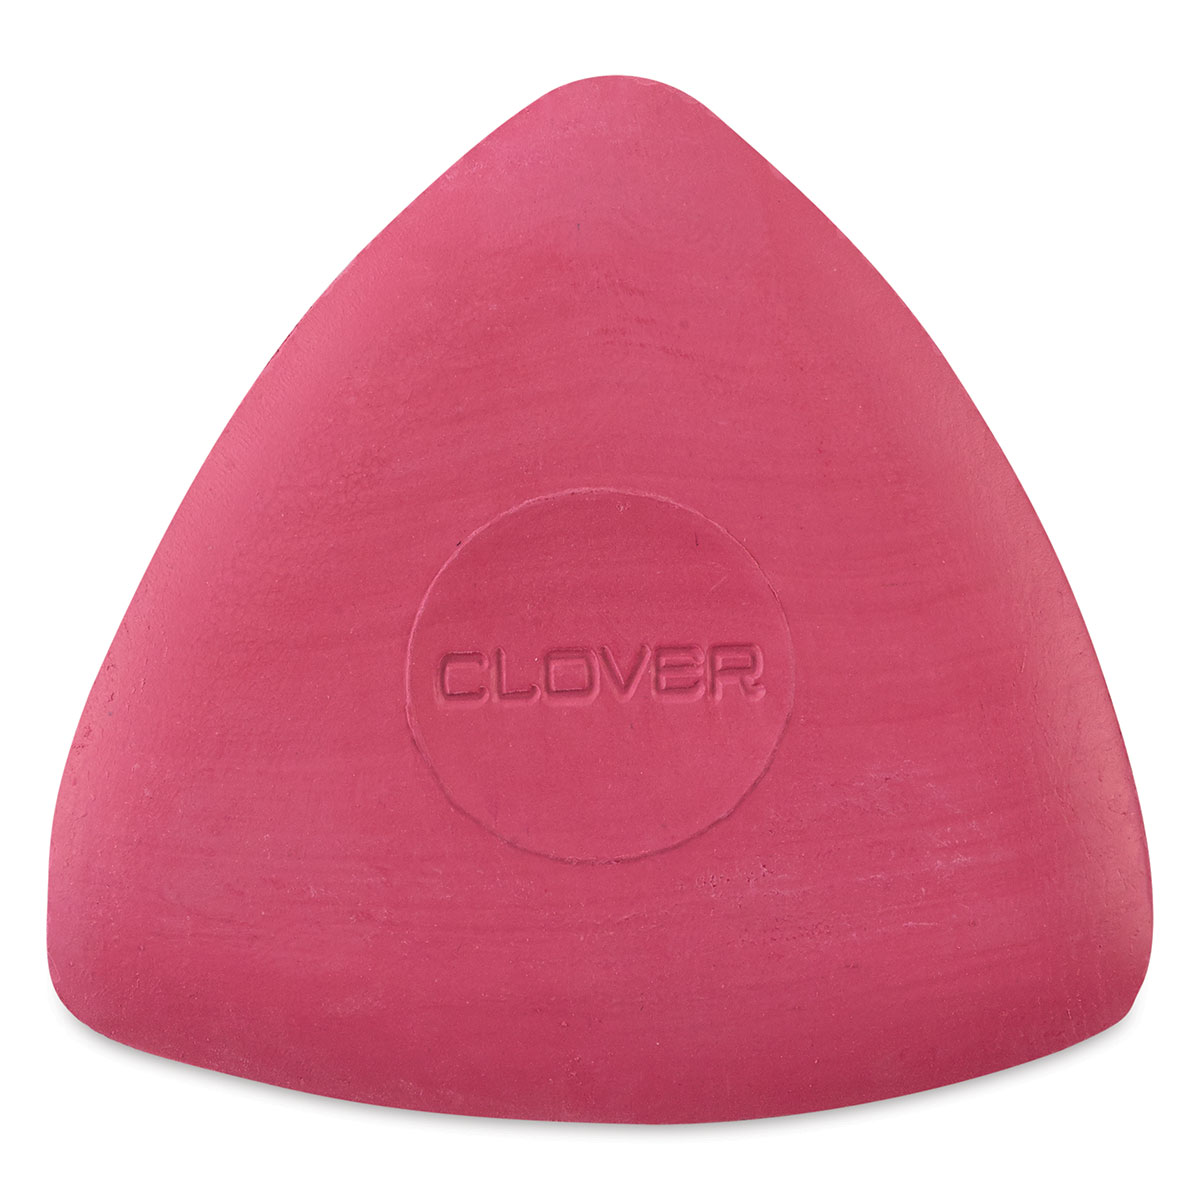 White Tailors Chalk, Clover 4324, Triangle Fabric Marking Tool. Sewing  Notions, Fabric Chalk 